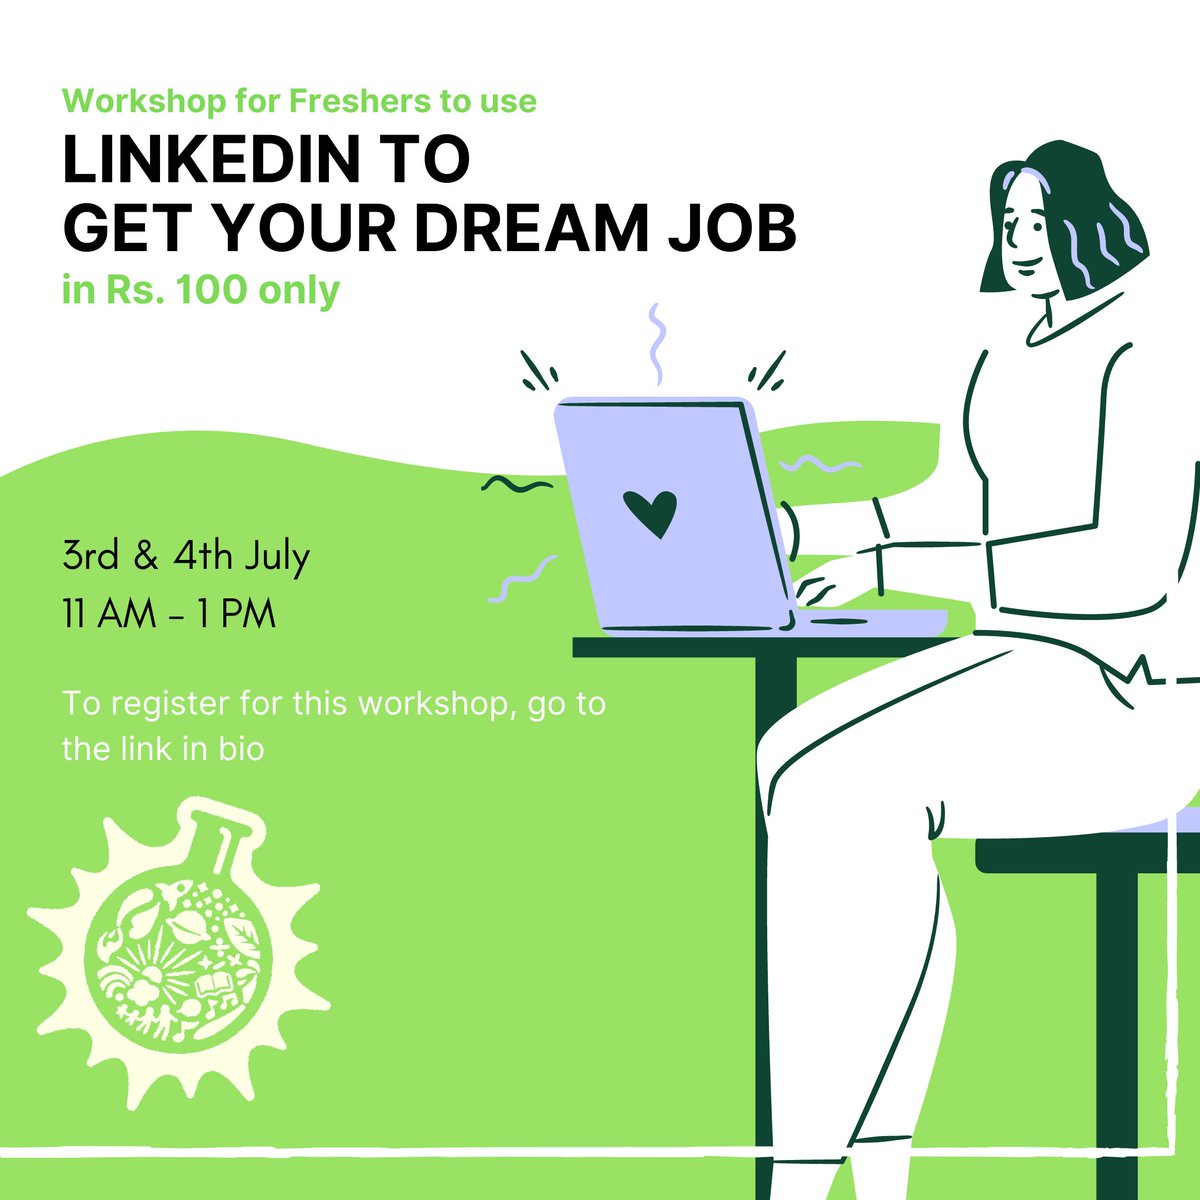 Get ready for our ultimate workshop on 'Linkedin to get your dream job' and learn how you can use Linkedin to set your career path.

#PsychoLabs #Advertising #Marketing #DigitalMarketing  #SocialMediaMarketing #workshop #linkedinworkshop #linkedin #chandigarh #mohali